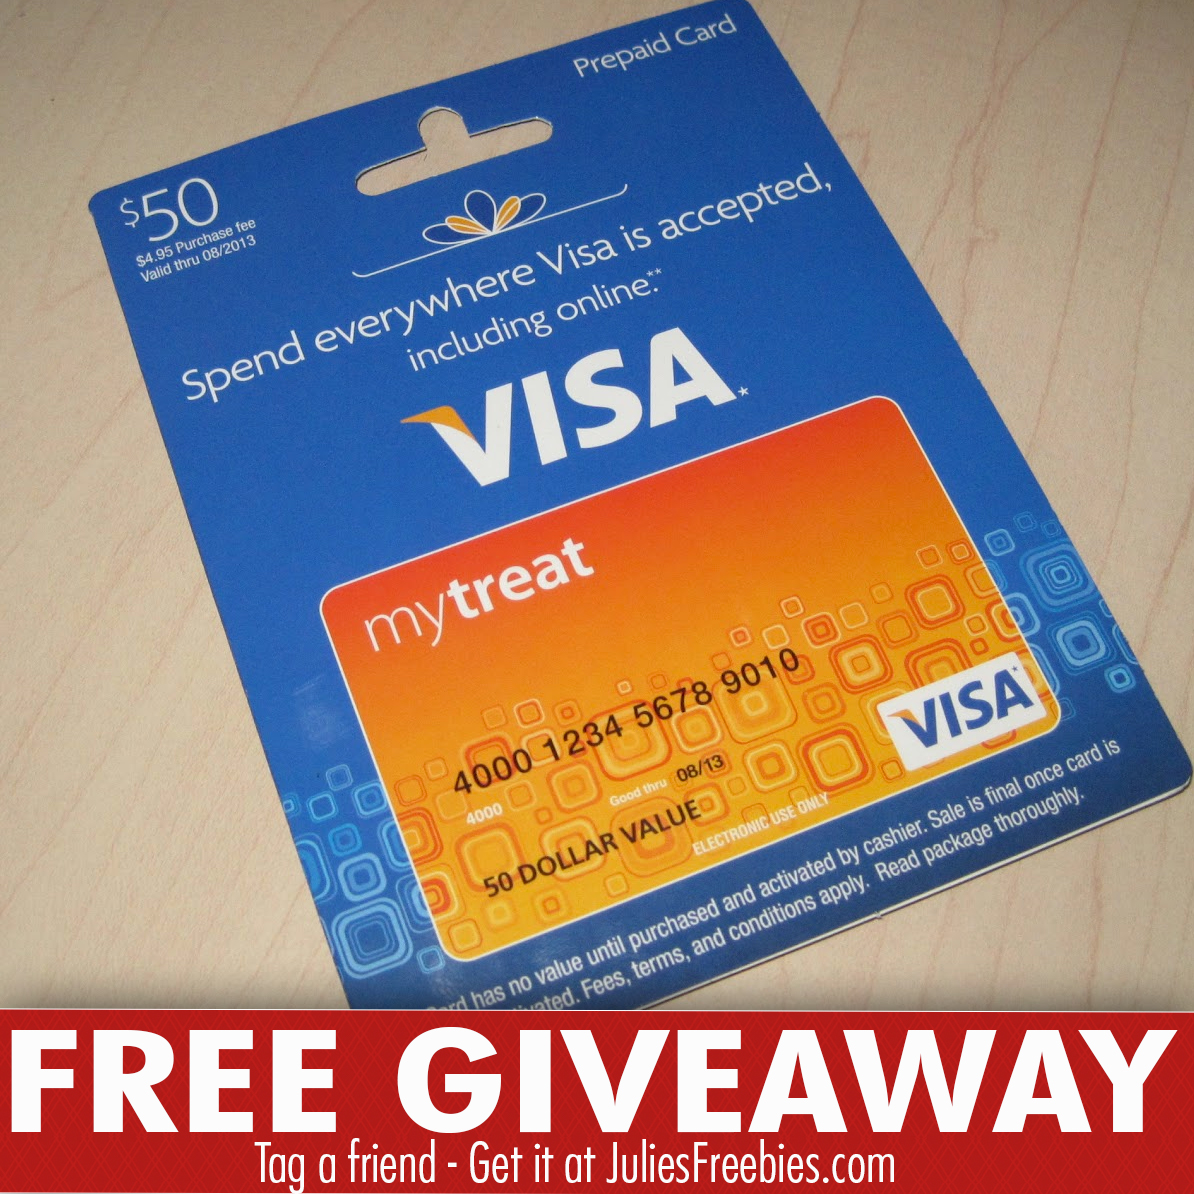 P&G Promotions: Get $5/$15 Prepaid Visa Card with $20/$50 Spend